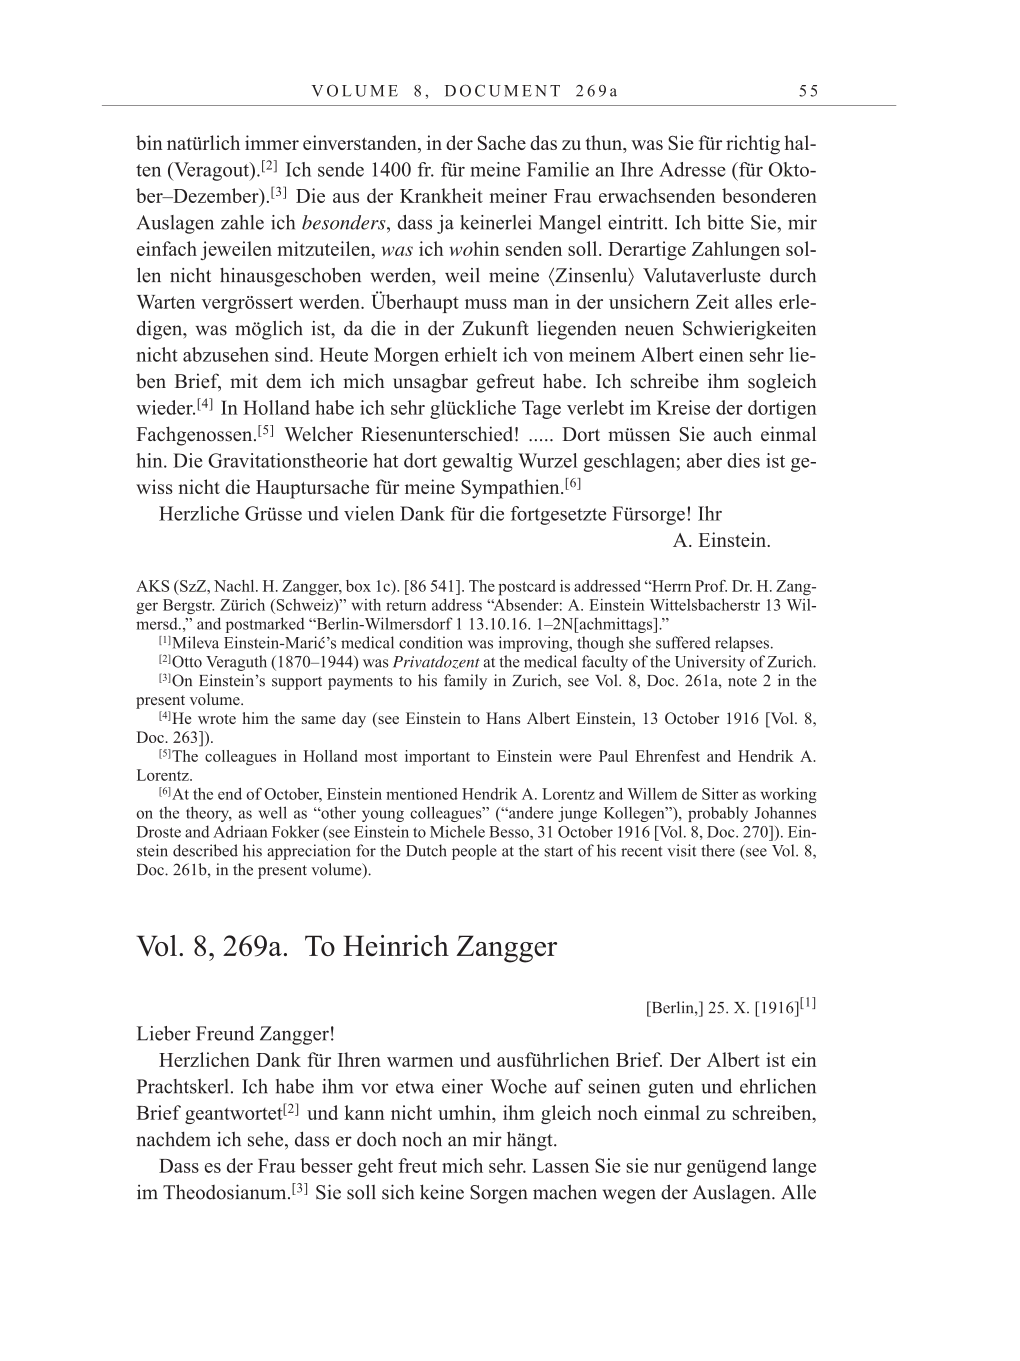 Volume 10: The Berlin Years: Correspondence May-December 1920 / Supplementary Correspondence 1909-1920 page 55